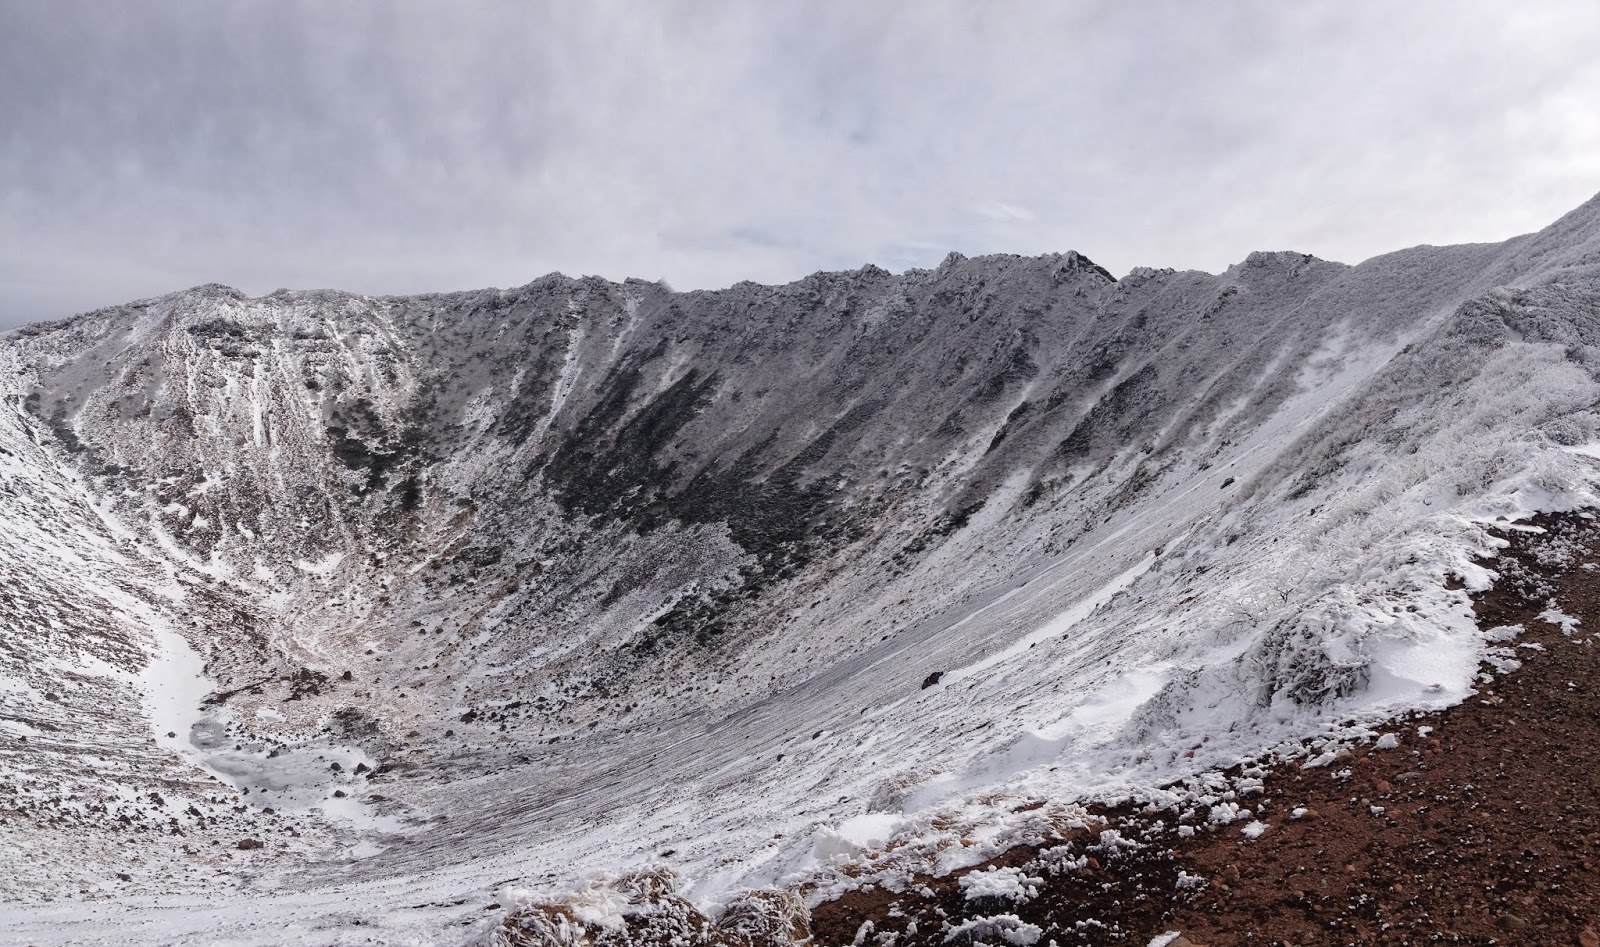 The crater of Yotei, dusted with a thin layer of snow and looking very dramatic